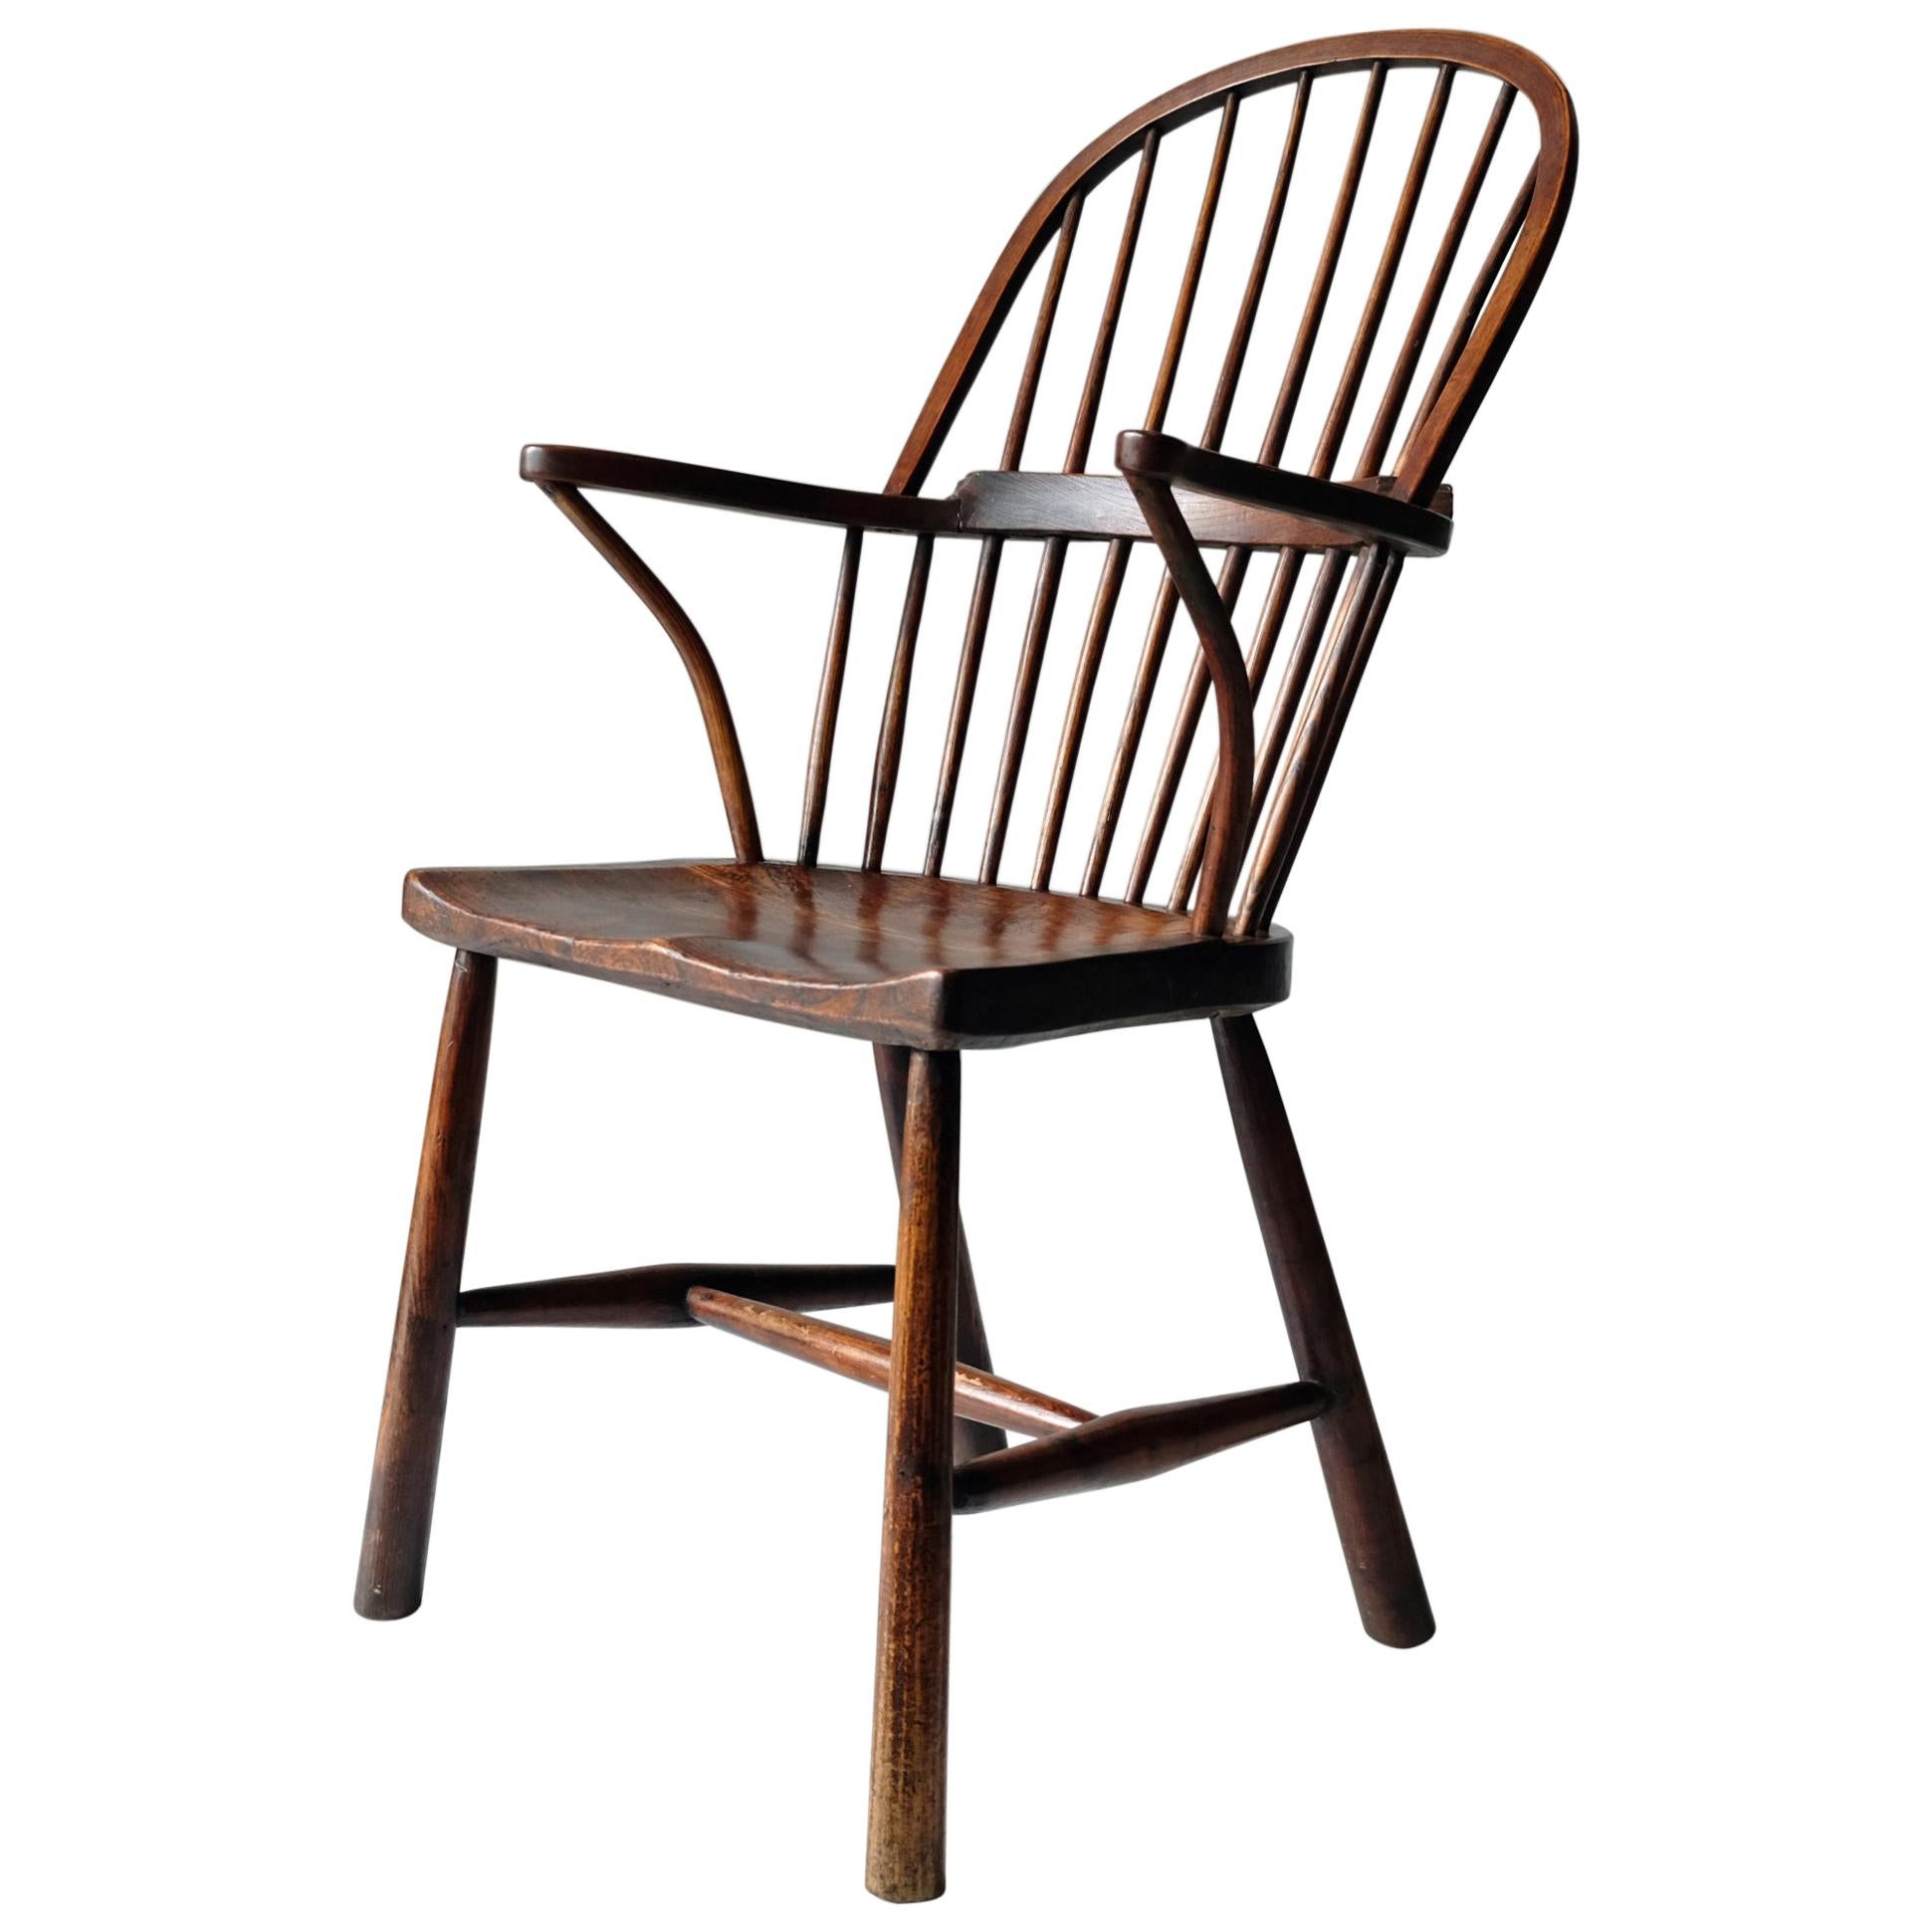 English Country Stickback Windsor Chair, Simple, Rustic, 19th Century, Elm, Ash